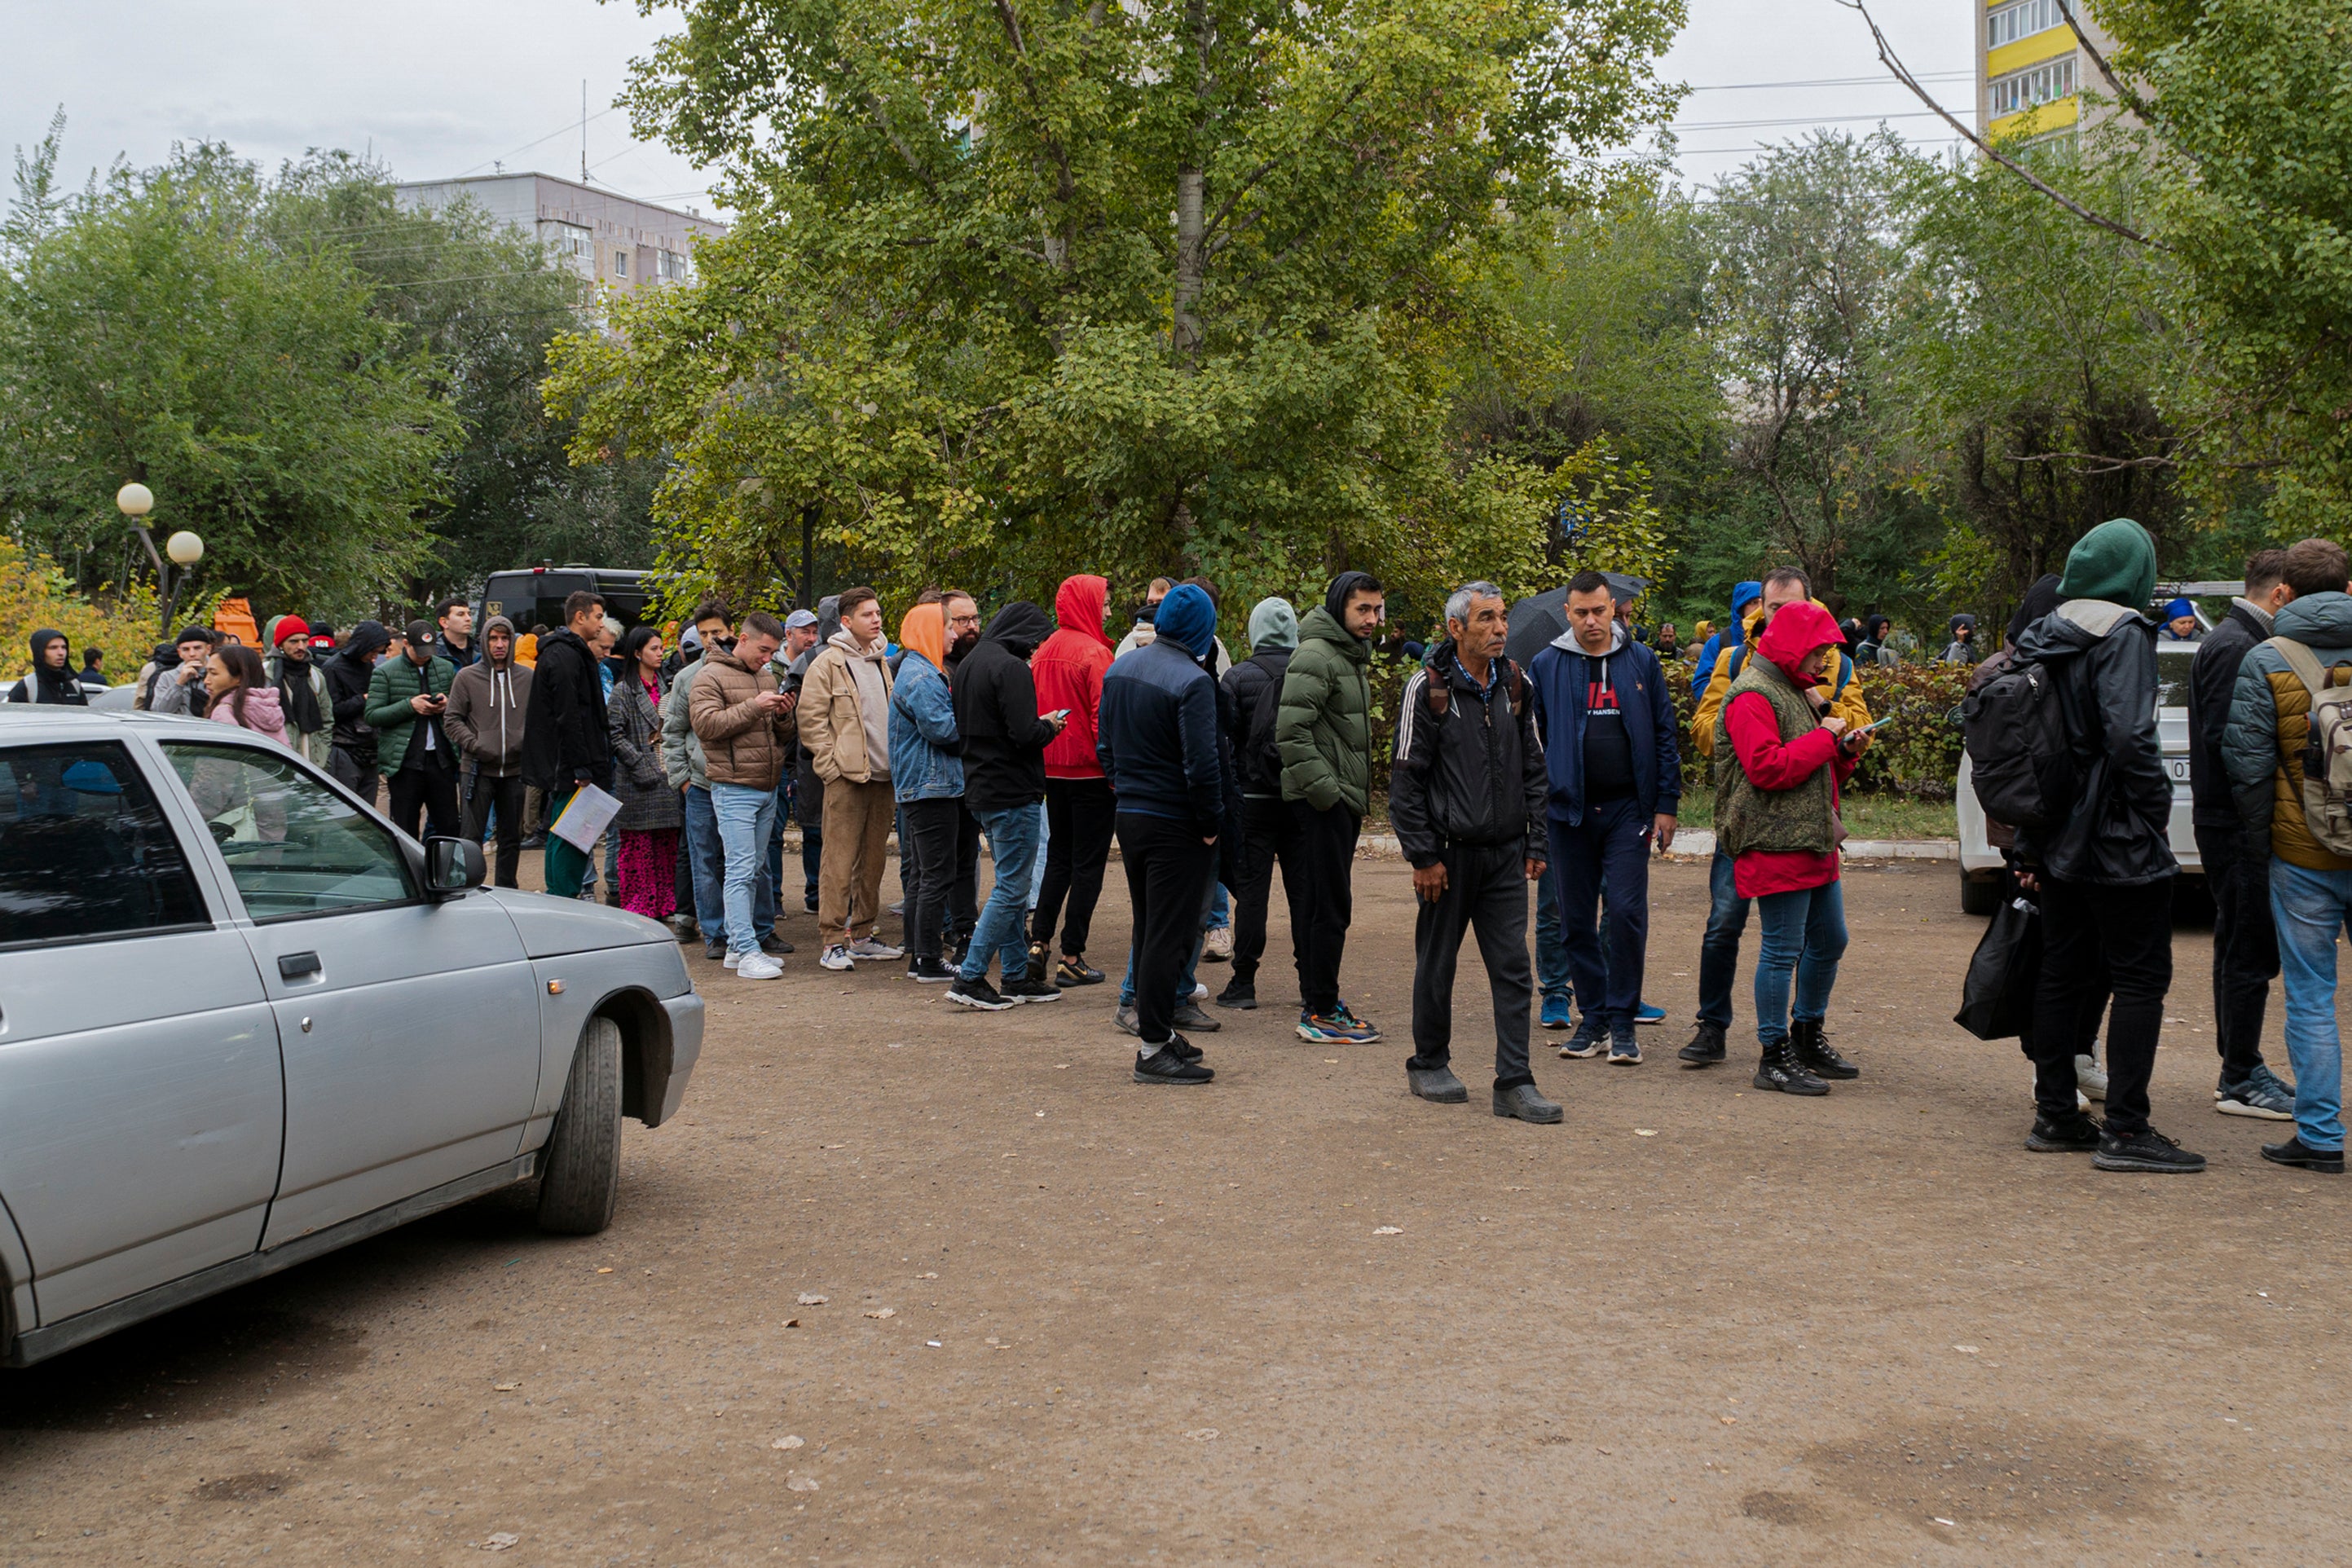 Russians line up to register after crossing the border into Kazakhstan about 250 miles south of Chelyabinsk on Wednesday